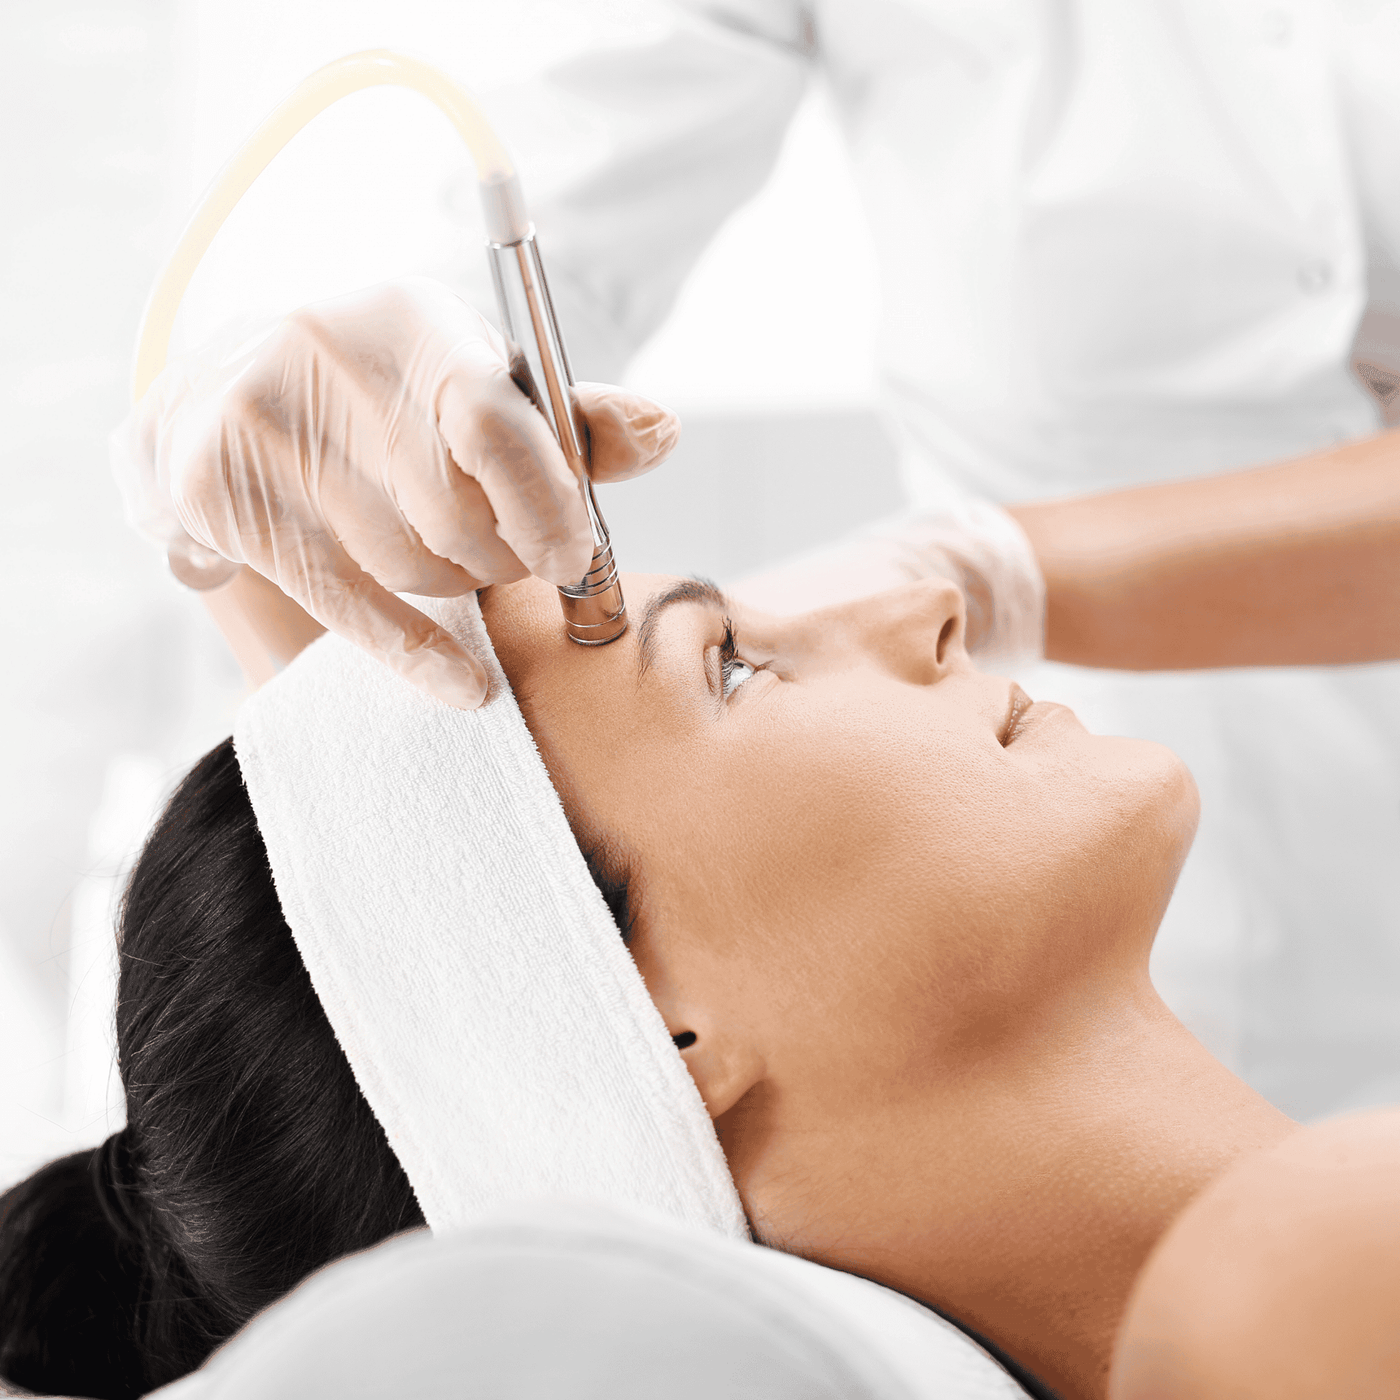 Microdermabrasion Online Course - The London Brow Company